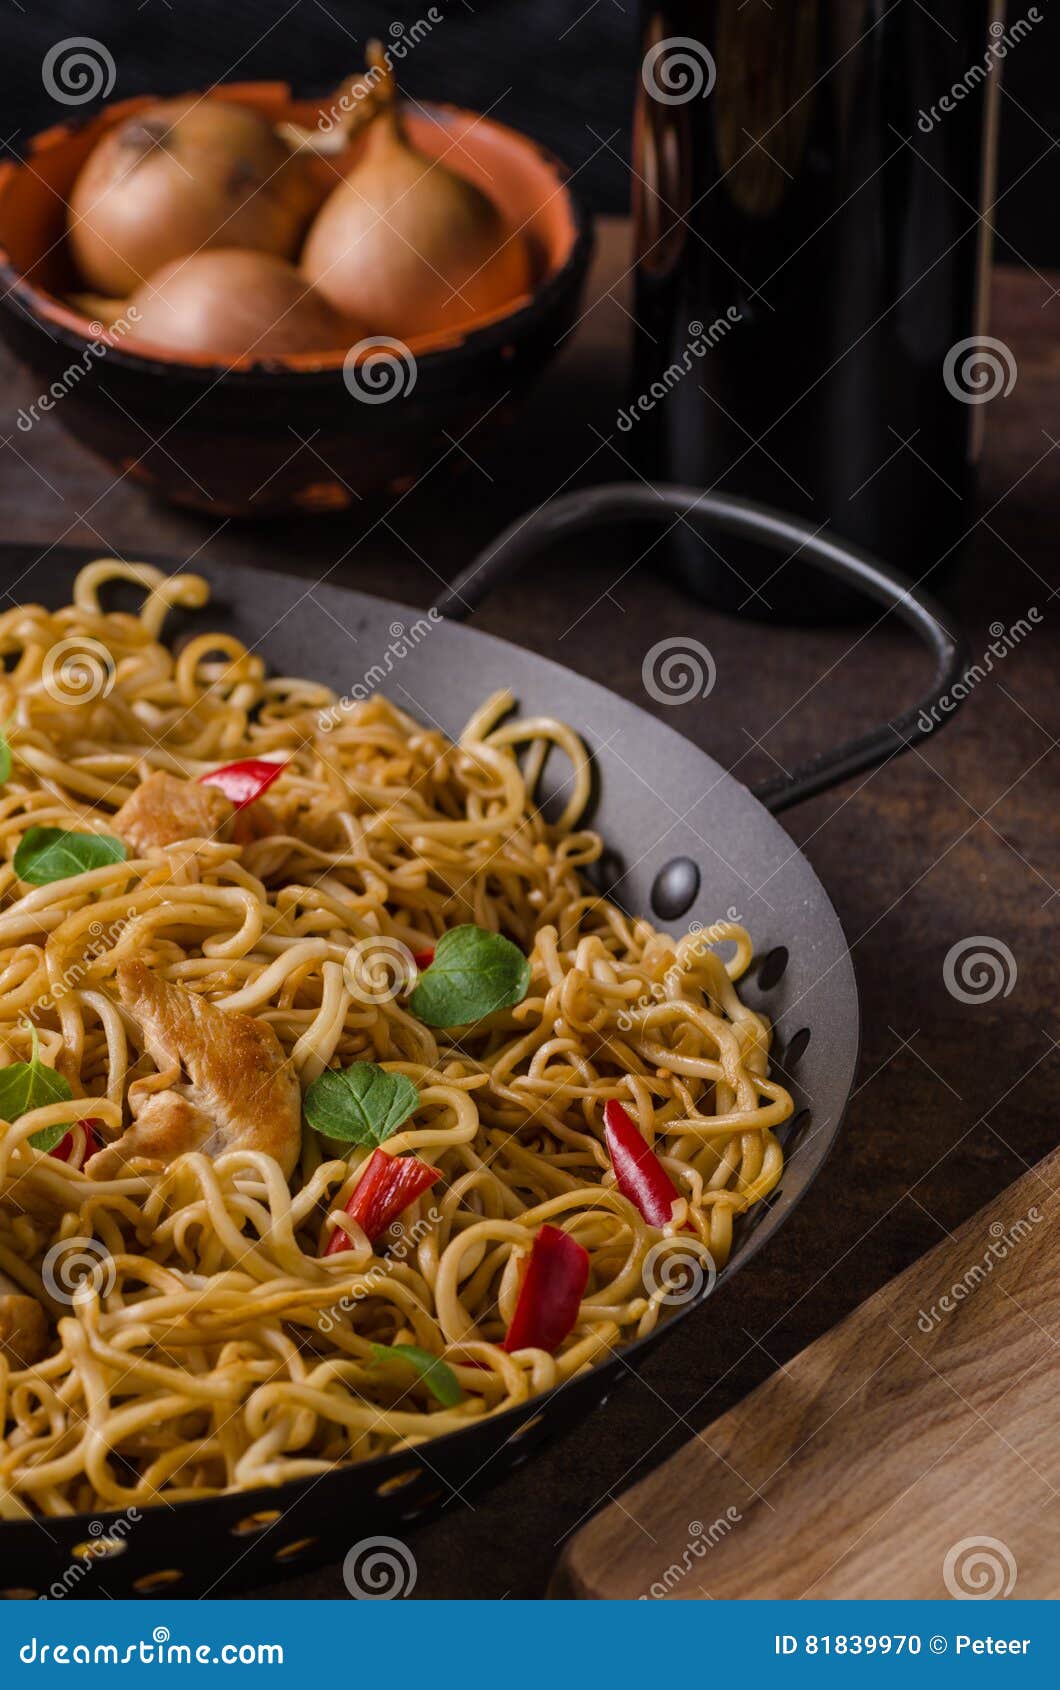 Chinese noodles chicken stock photo. Image of bowl, asian - 81839970